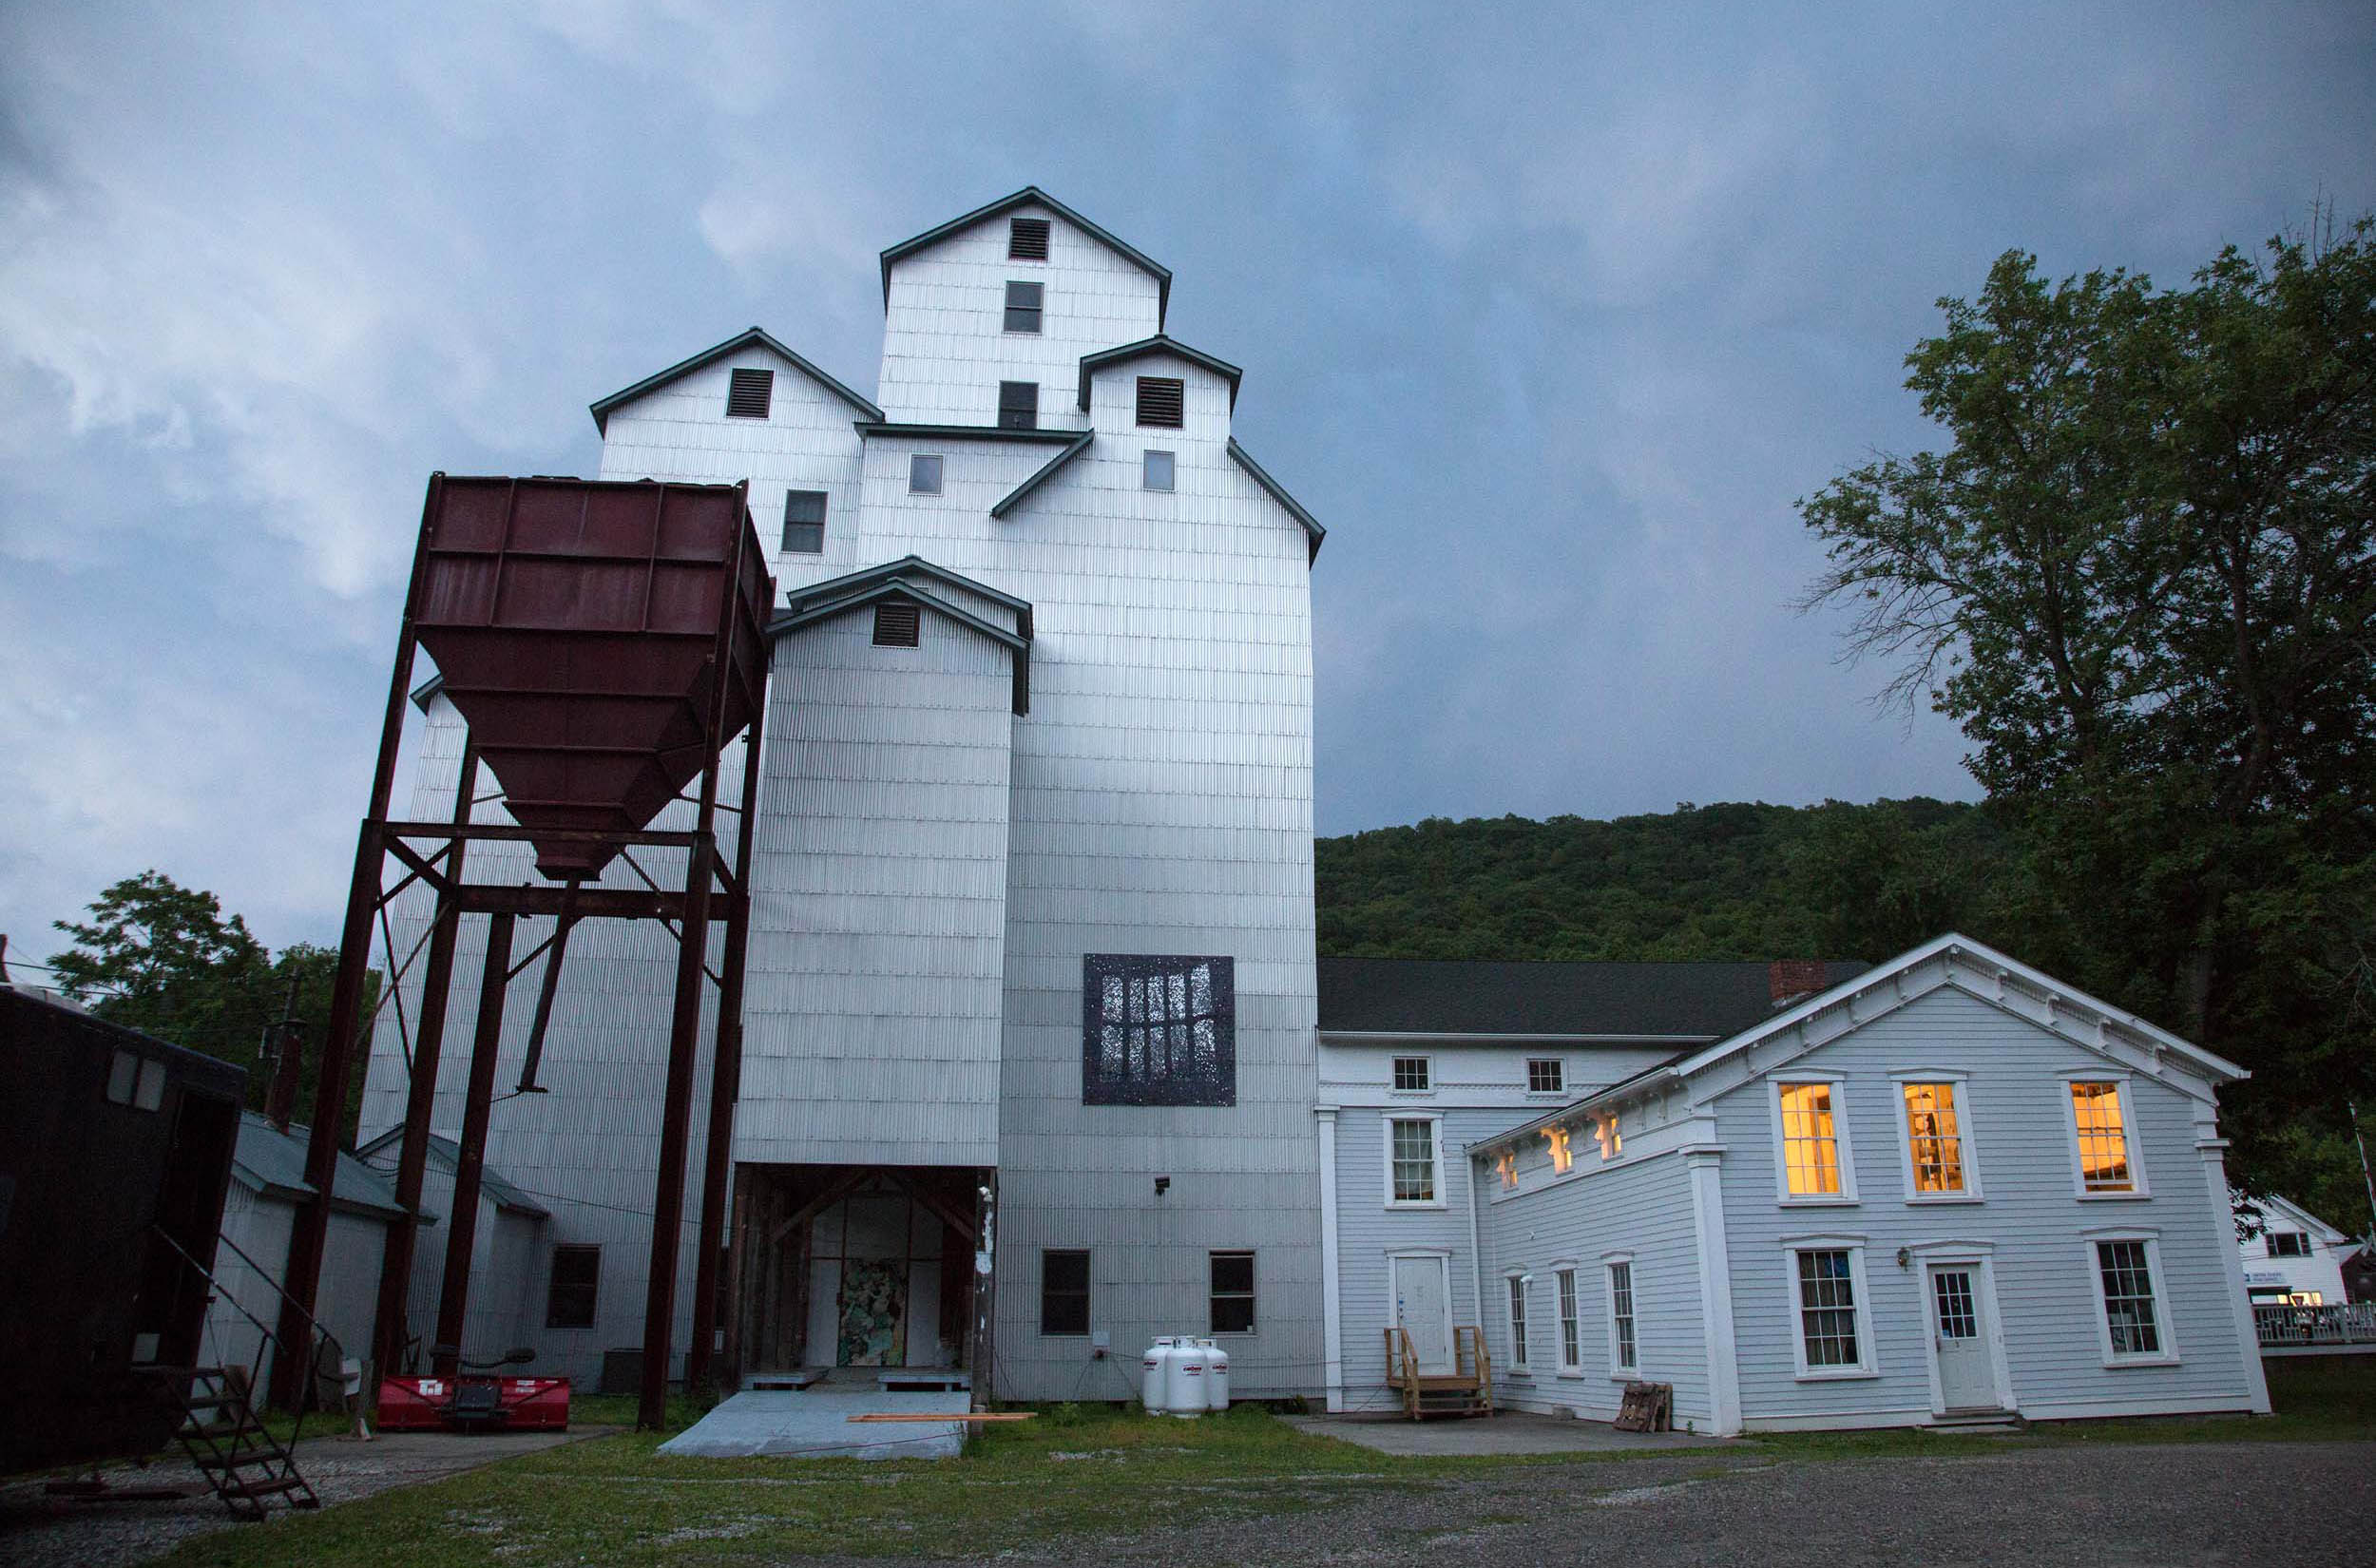 The exterior of the Wassaic Project's home base, called Maxon Mills, under a stormy sky. It is comprised of several interlocking buildings including a former grain elevator and auction barn.